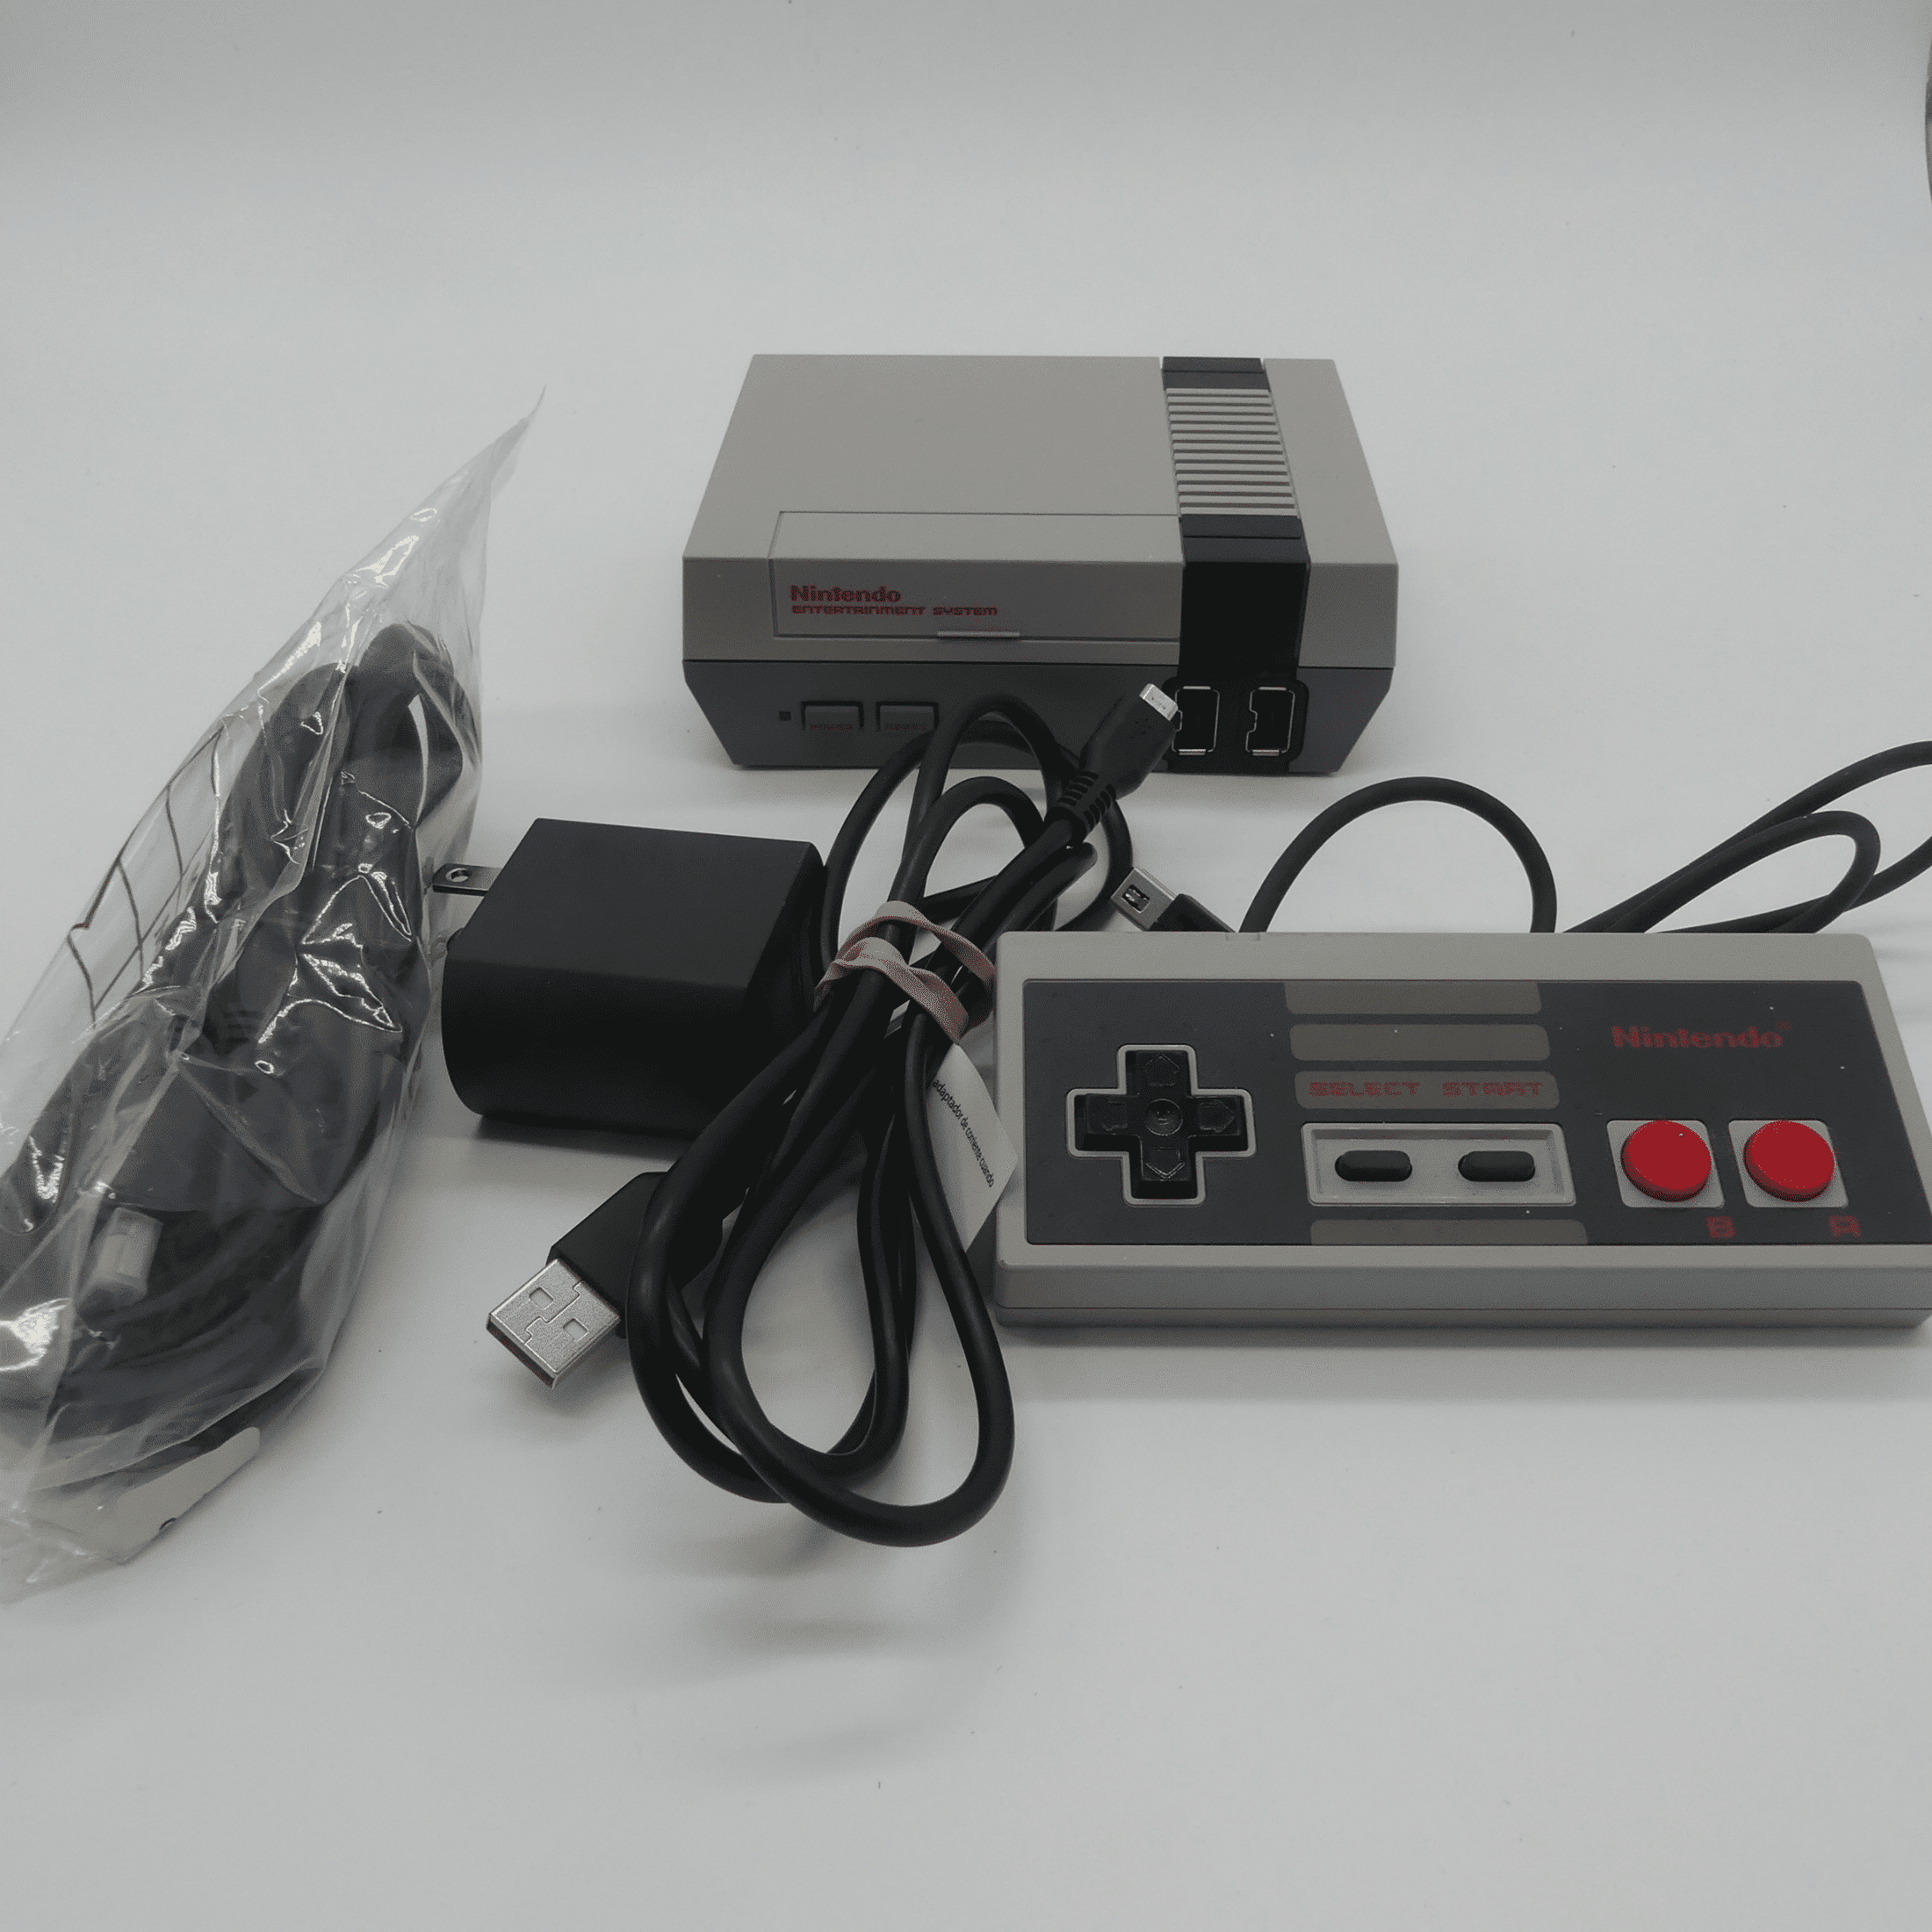 Pre-Owned Nintendo NES Classic Edition Entertainment System